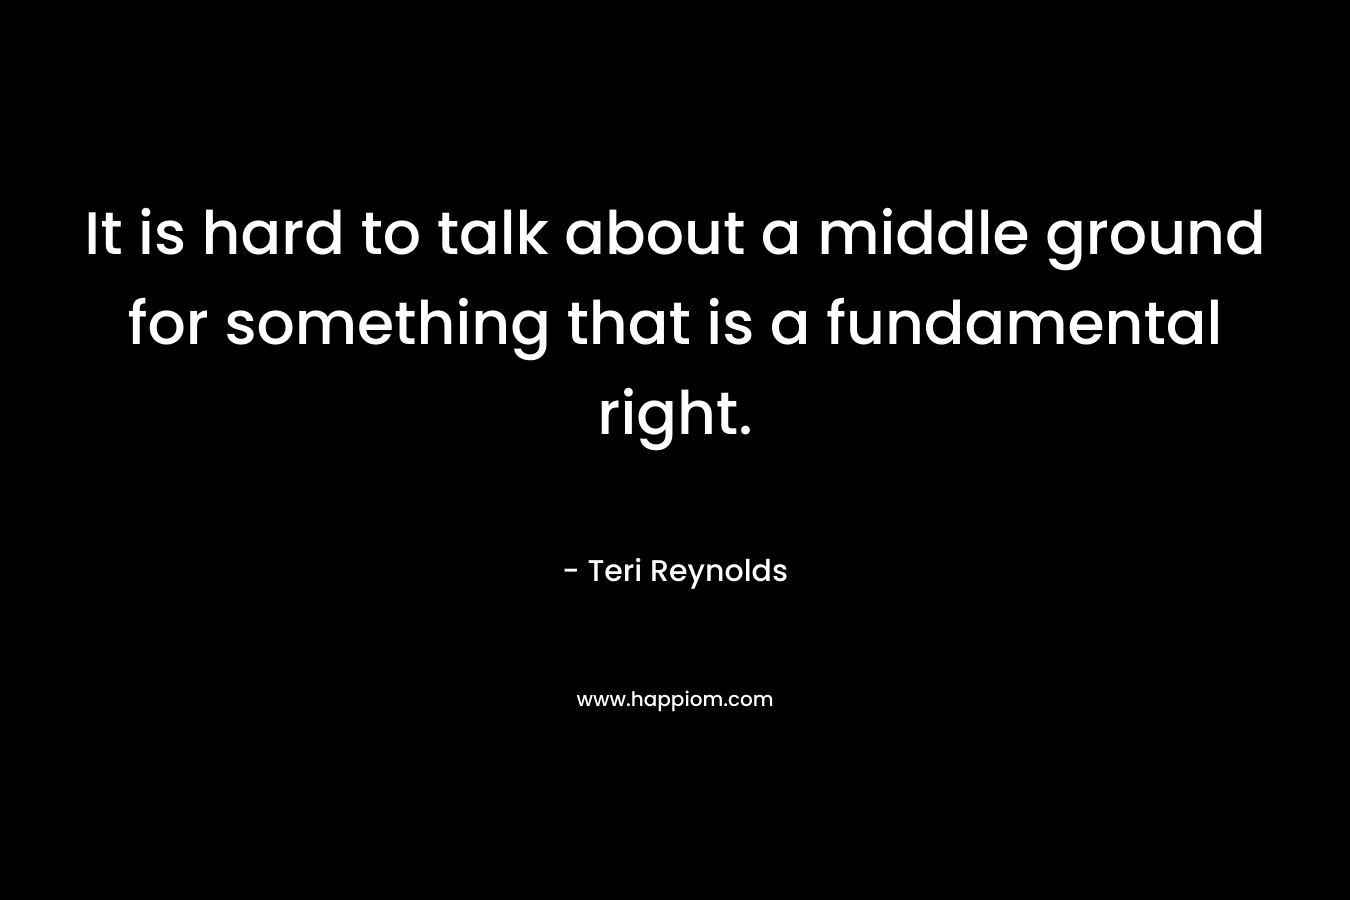 It is hard to talk about a middle ground for something that is a fundamental right. – Teri Reynolds